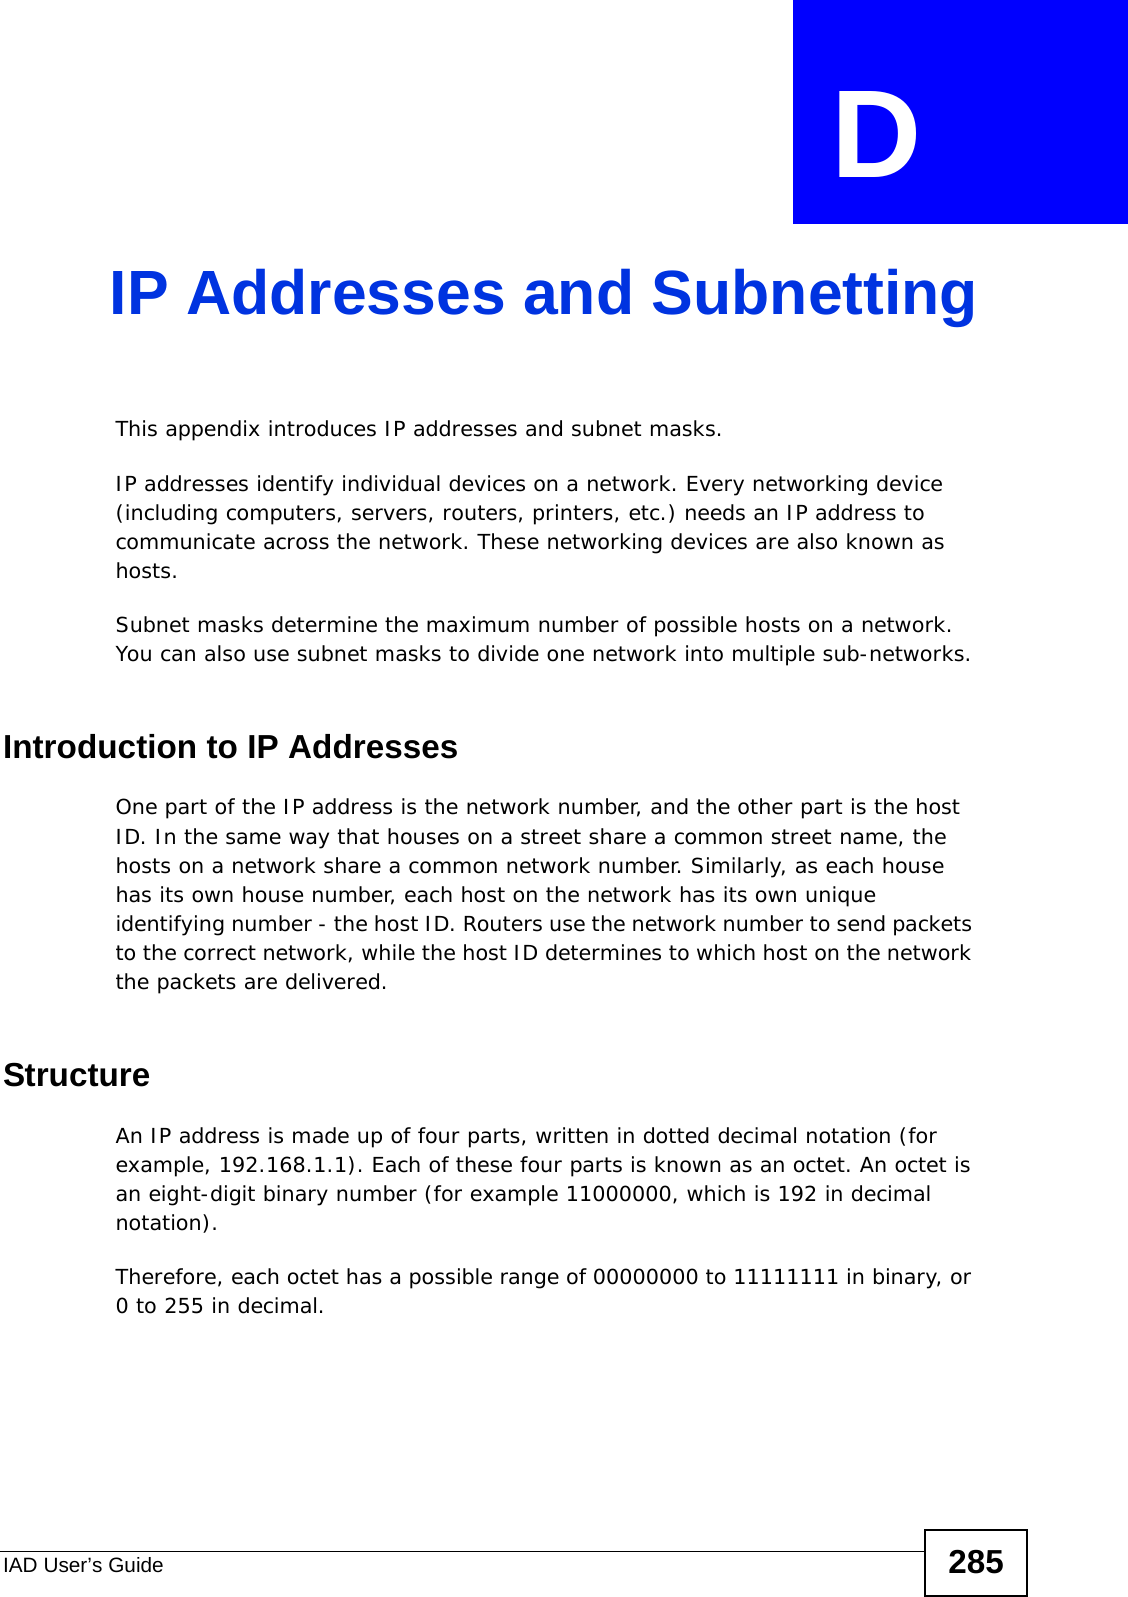 IAD User’s Guide 285APPENDIX  D IP Addresses and SubnettingThis appendix introduces IP addresses and subnet masks. IP addresses identify individual devices on a network. Every networking device (including computers, servers, routers, printers, etc.) needs an IP address to communicate across the network. These networking devices are also known as hosts.Subnet masks determine the maximum number of possible hosts on a network. You can also use subnet masks to divide one network into multiple sub-networks.Introduction to IP AddressesOne part of the IP address is the network number, and the other part is the host ID. In the same way that houses on a street share a common street name, the hosts on a network share a common network number. Similarly, as each house has its own house number, each host on the network has its own unique identifying number - the host ID. Routers use the network number to send packets to the correct network, while the host ID determines to which host on the network the packets are delivered.StructureAn IP address is made up of four parts, written in dotted decimal notation (for example, 192.168.1.1). Each of these four parts is known as an octet. An octet is an eight-digit binary number (for example 11000000, which is 192 in decimal notation). Therefore, each octet has a possible range of 00000000 to 11111111 in binary, or 0 to 255 in decimal.